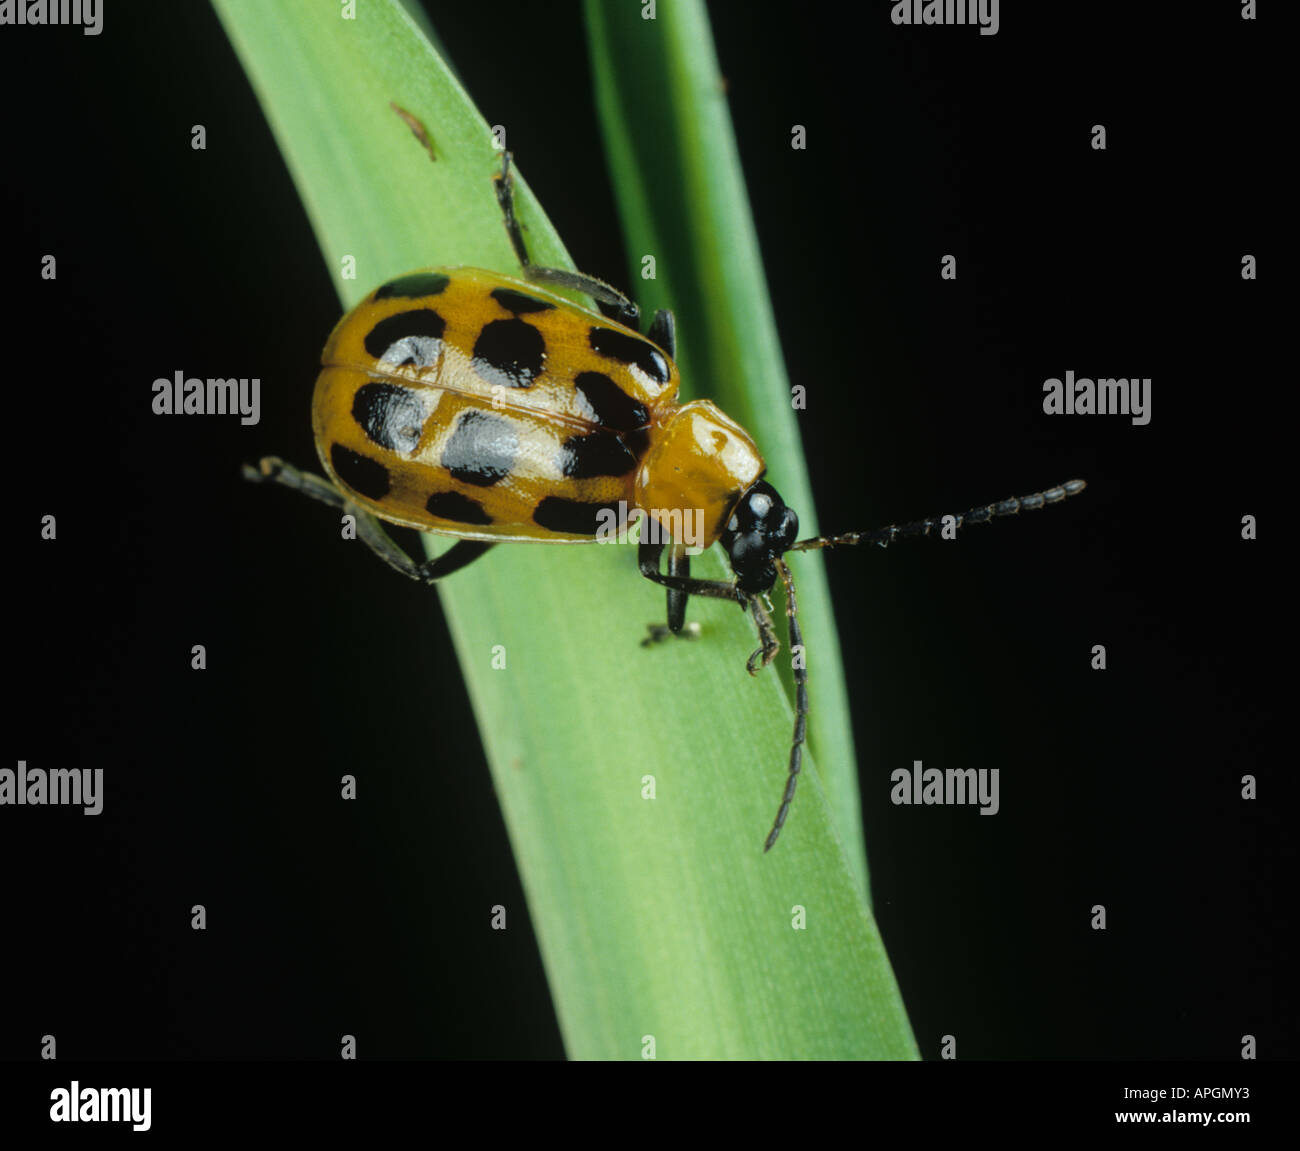 Spotted cucumber beetle Diabrotica sp adult on maize plant Stock Photo